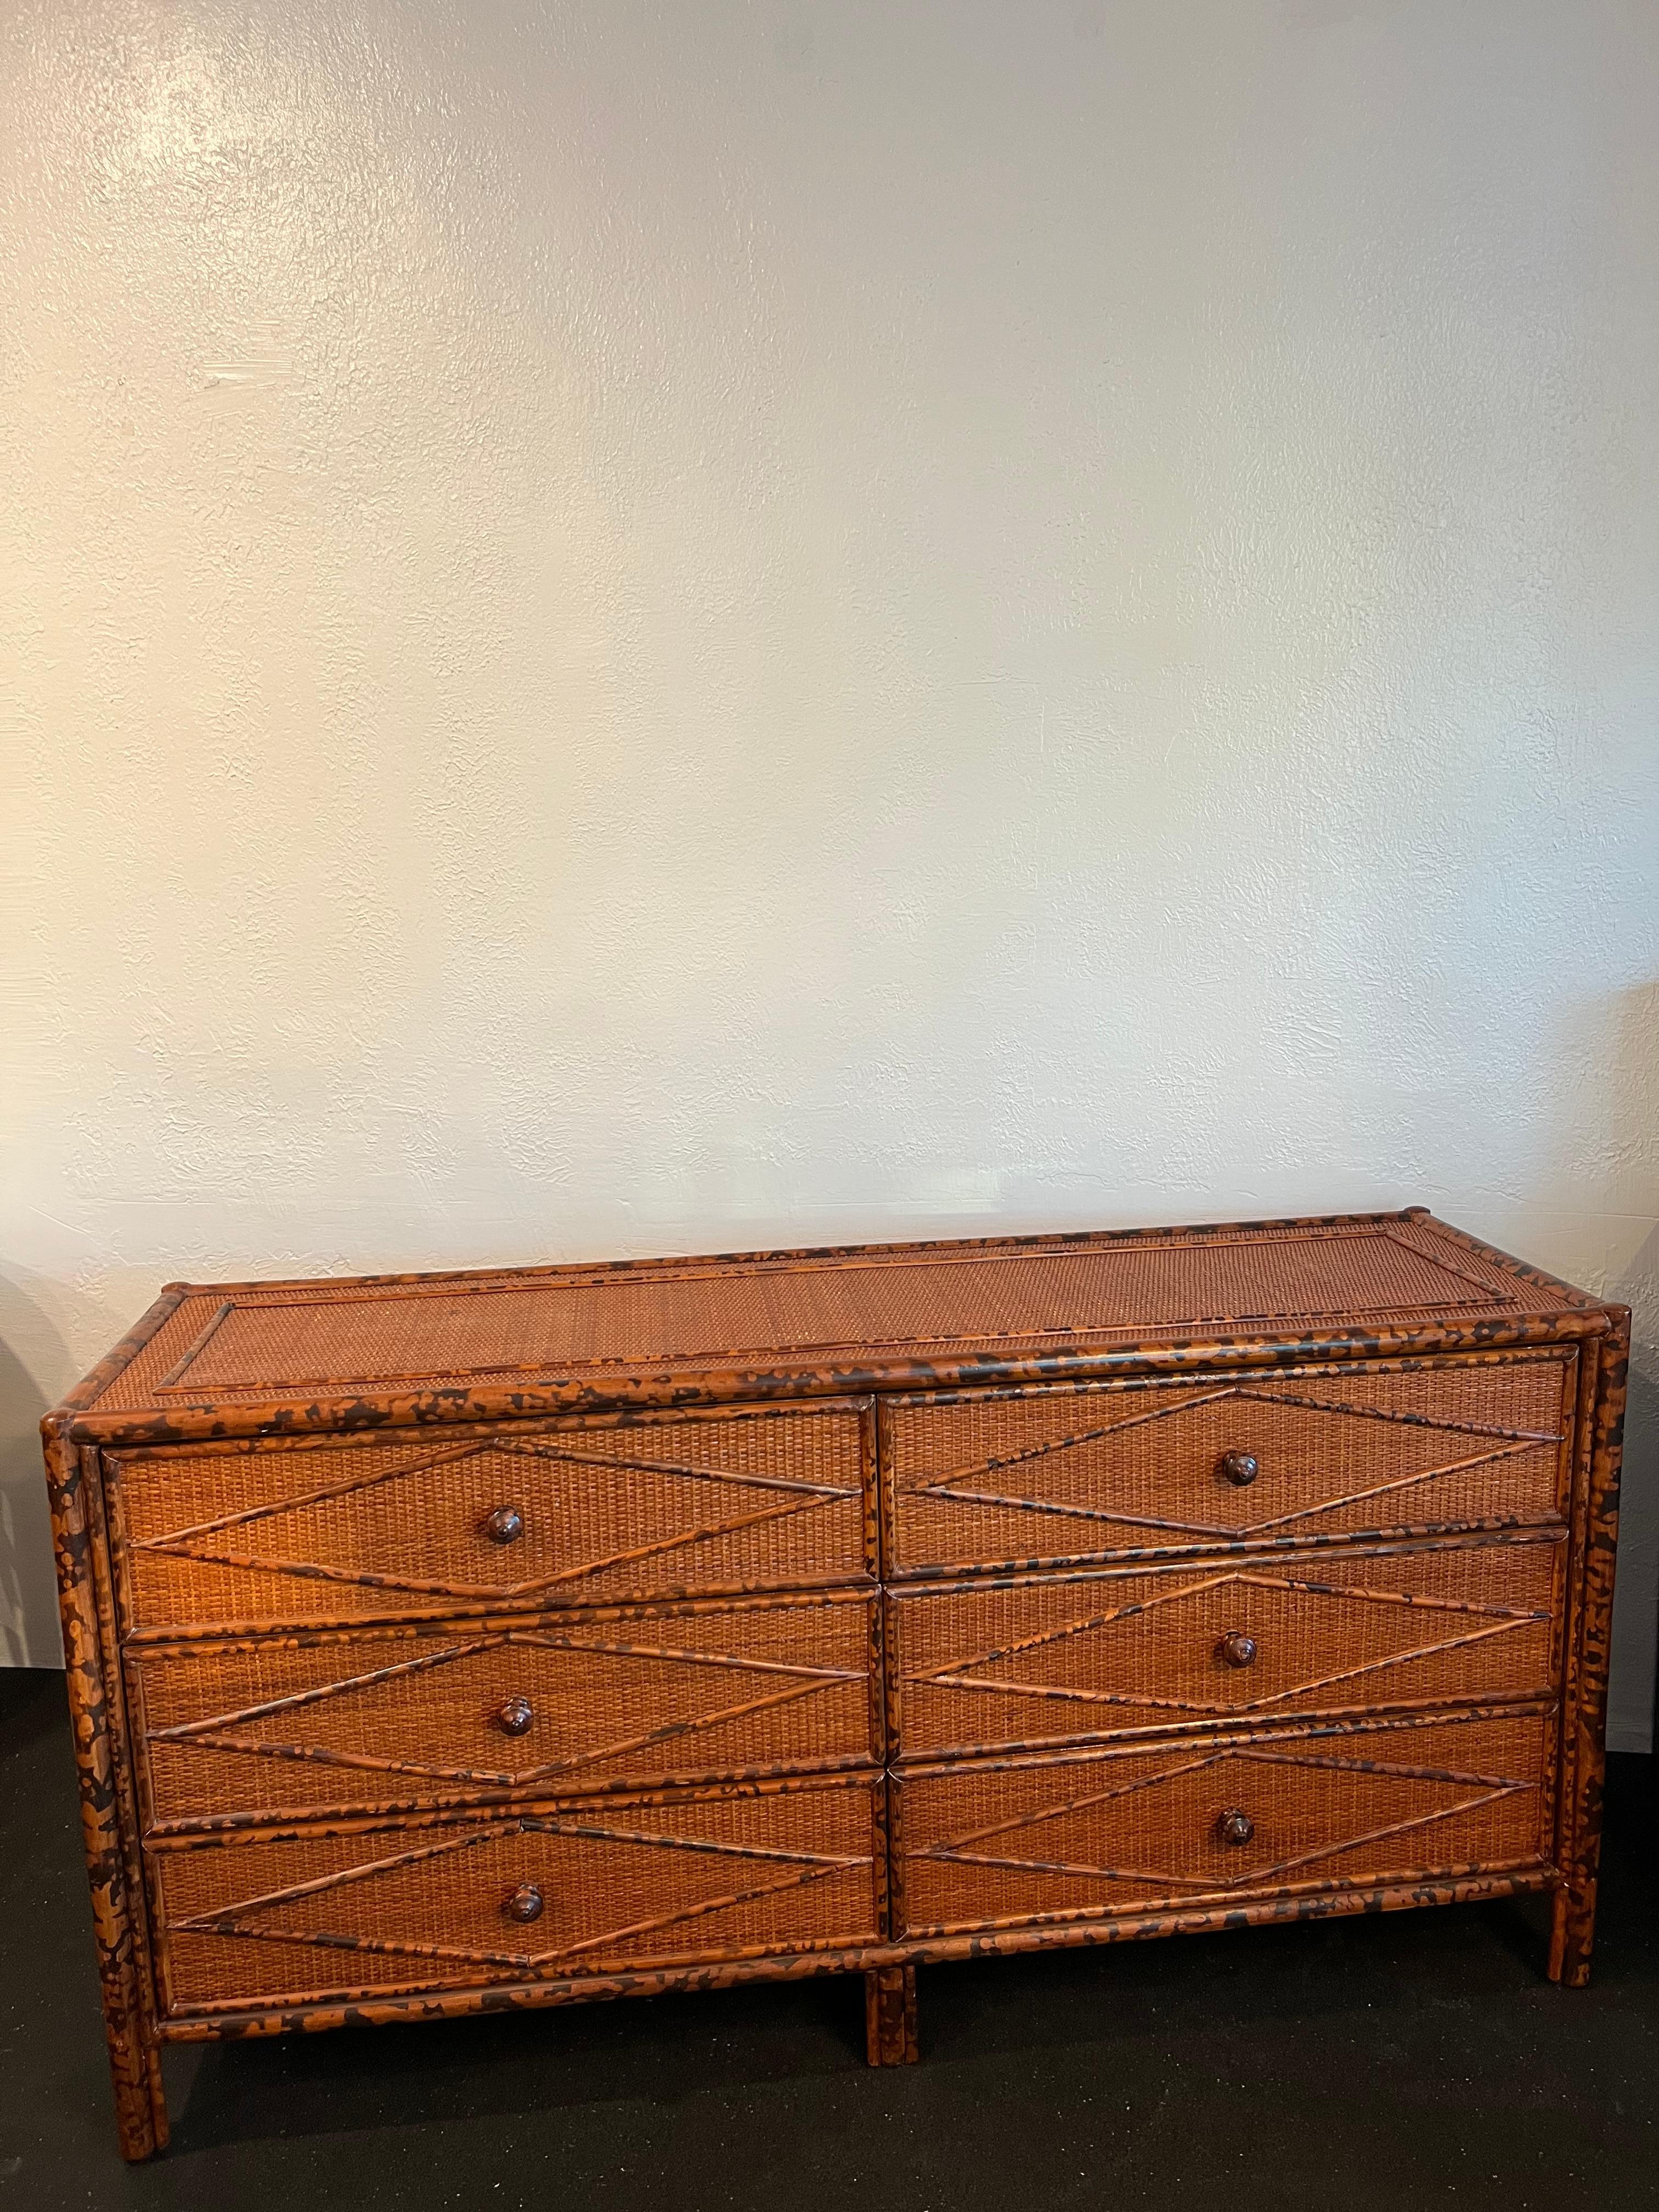 British colonial style burnt bamboo and cane dresser. Slight wear to finish of cane (please refer to photos). Matching pair of nightstands and chest available in separate listings. 

Would work well in a variety of interiors such as modern, mid